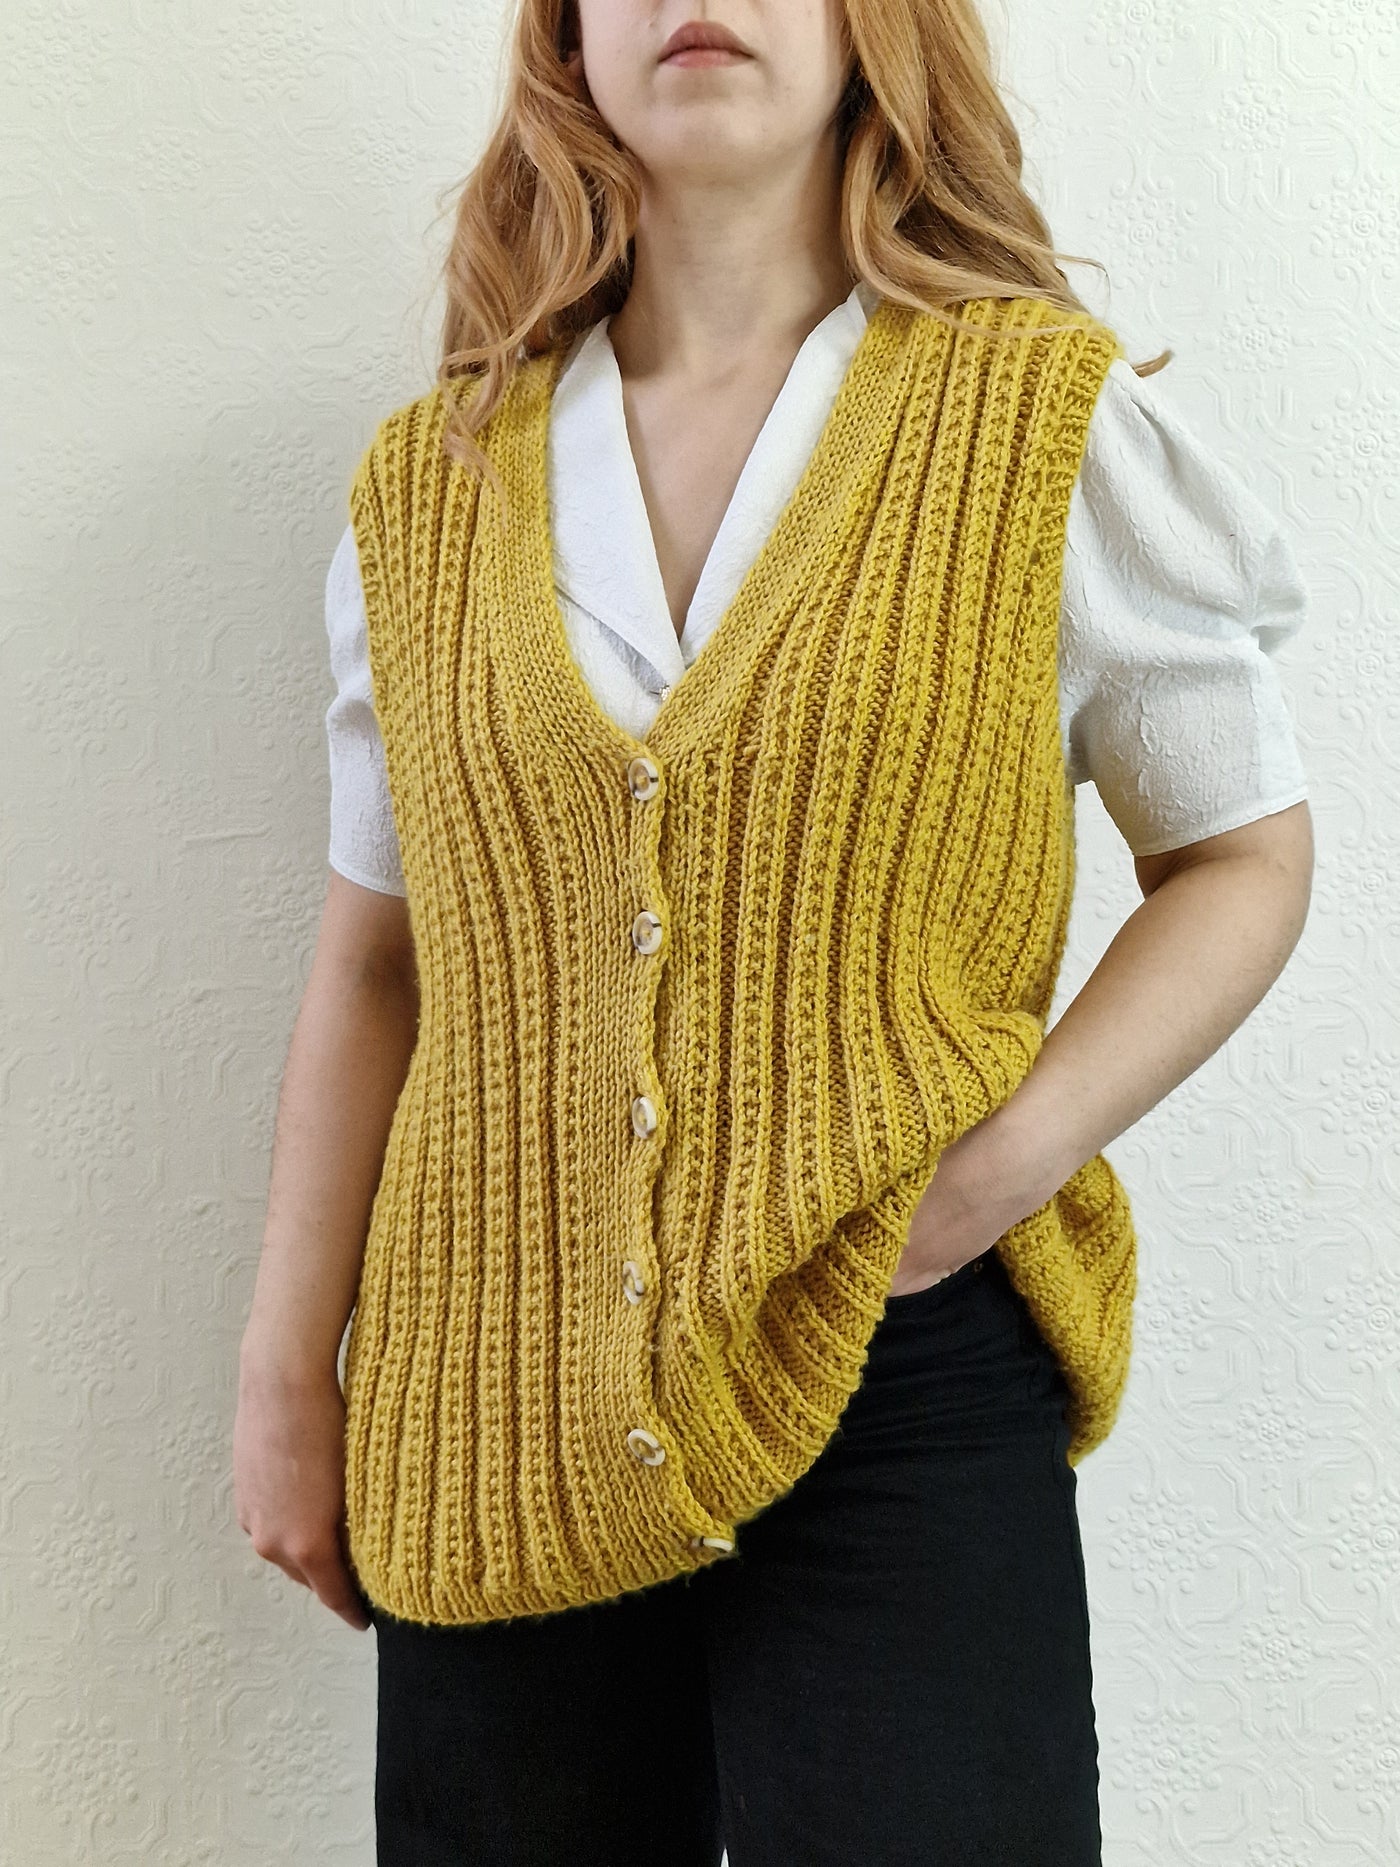 Vintage 80s Handknitted Mustard Ribbed Vest with Buttons - L/XL